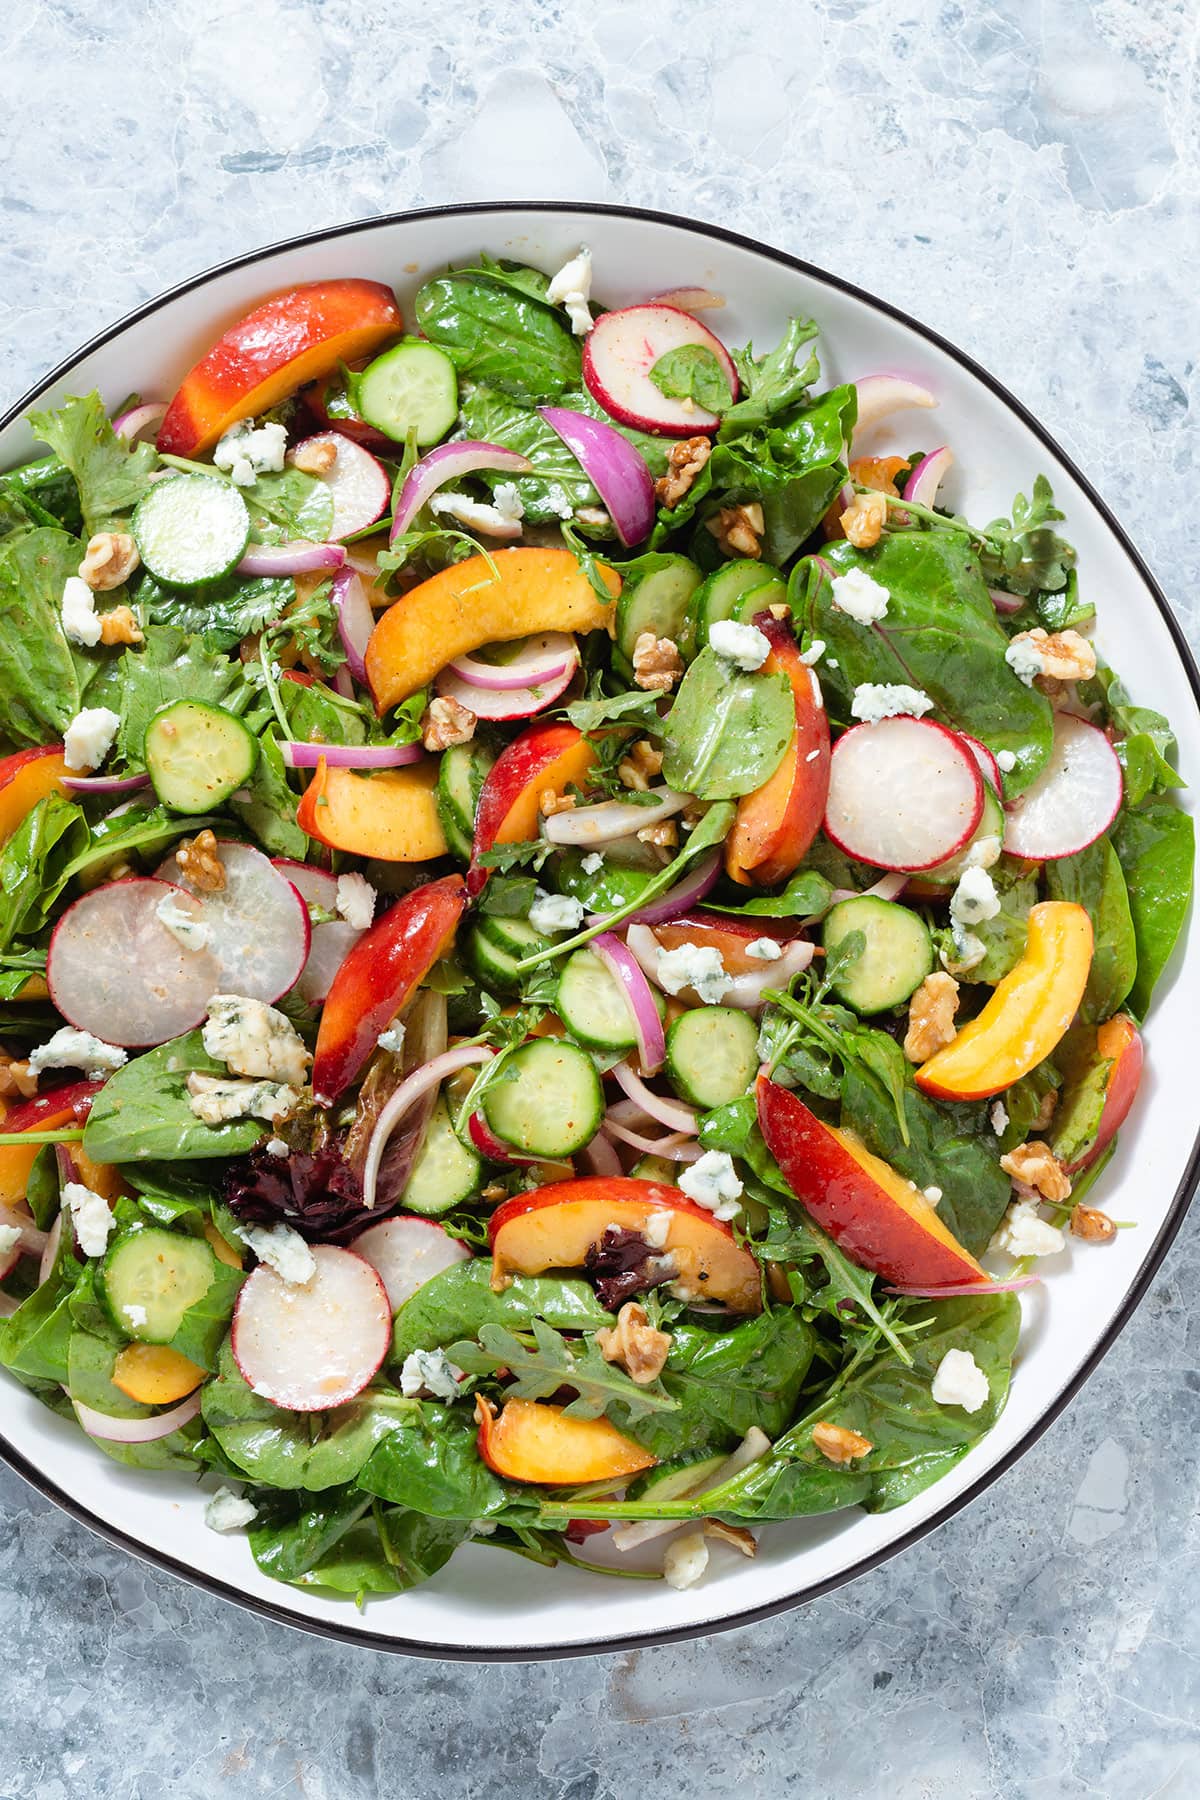 Nectarine salad with mixed greens and radishes on a large white serving platter with a black rim on a grey stone background.